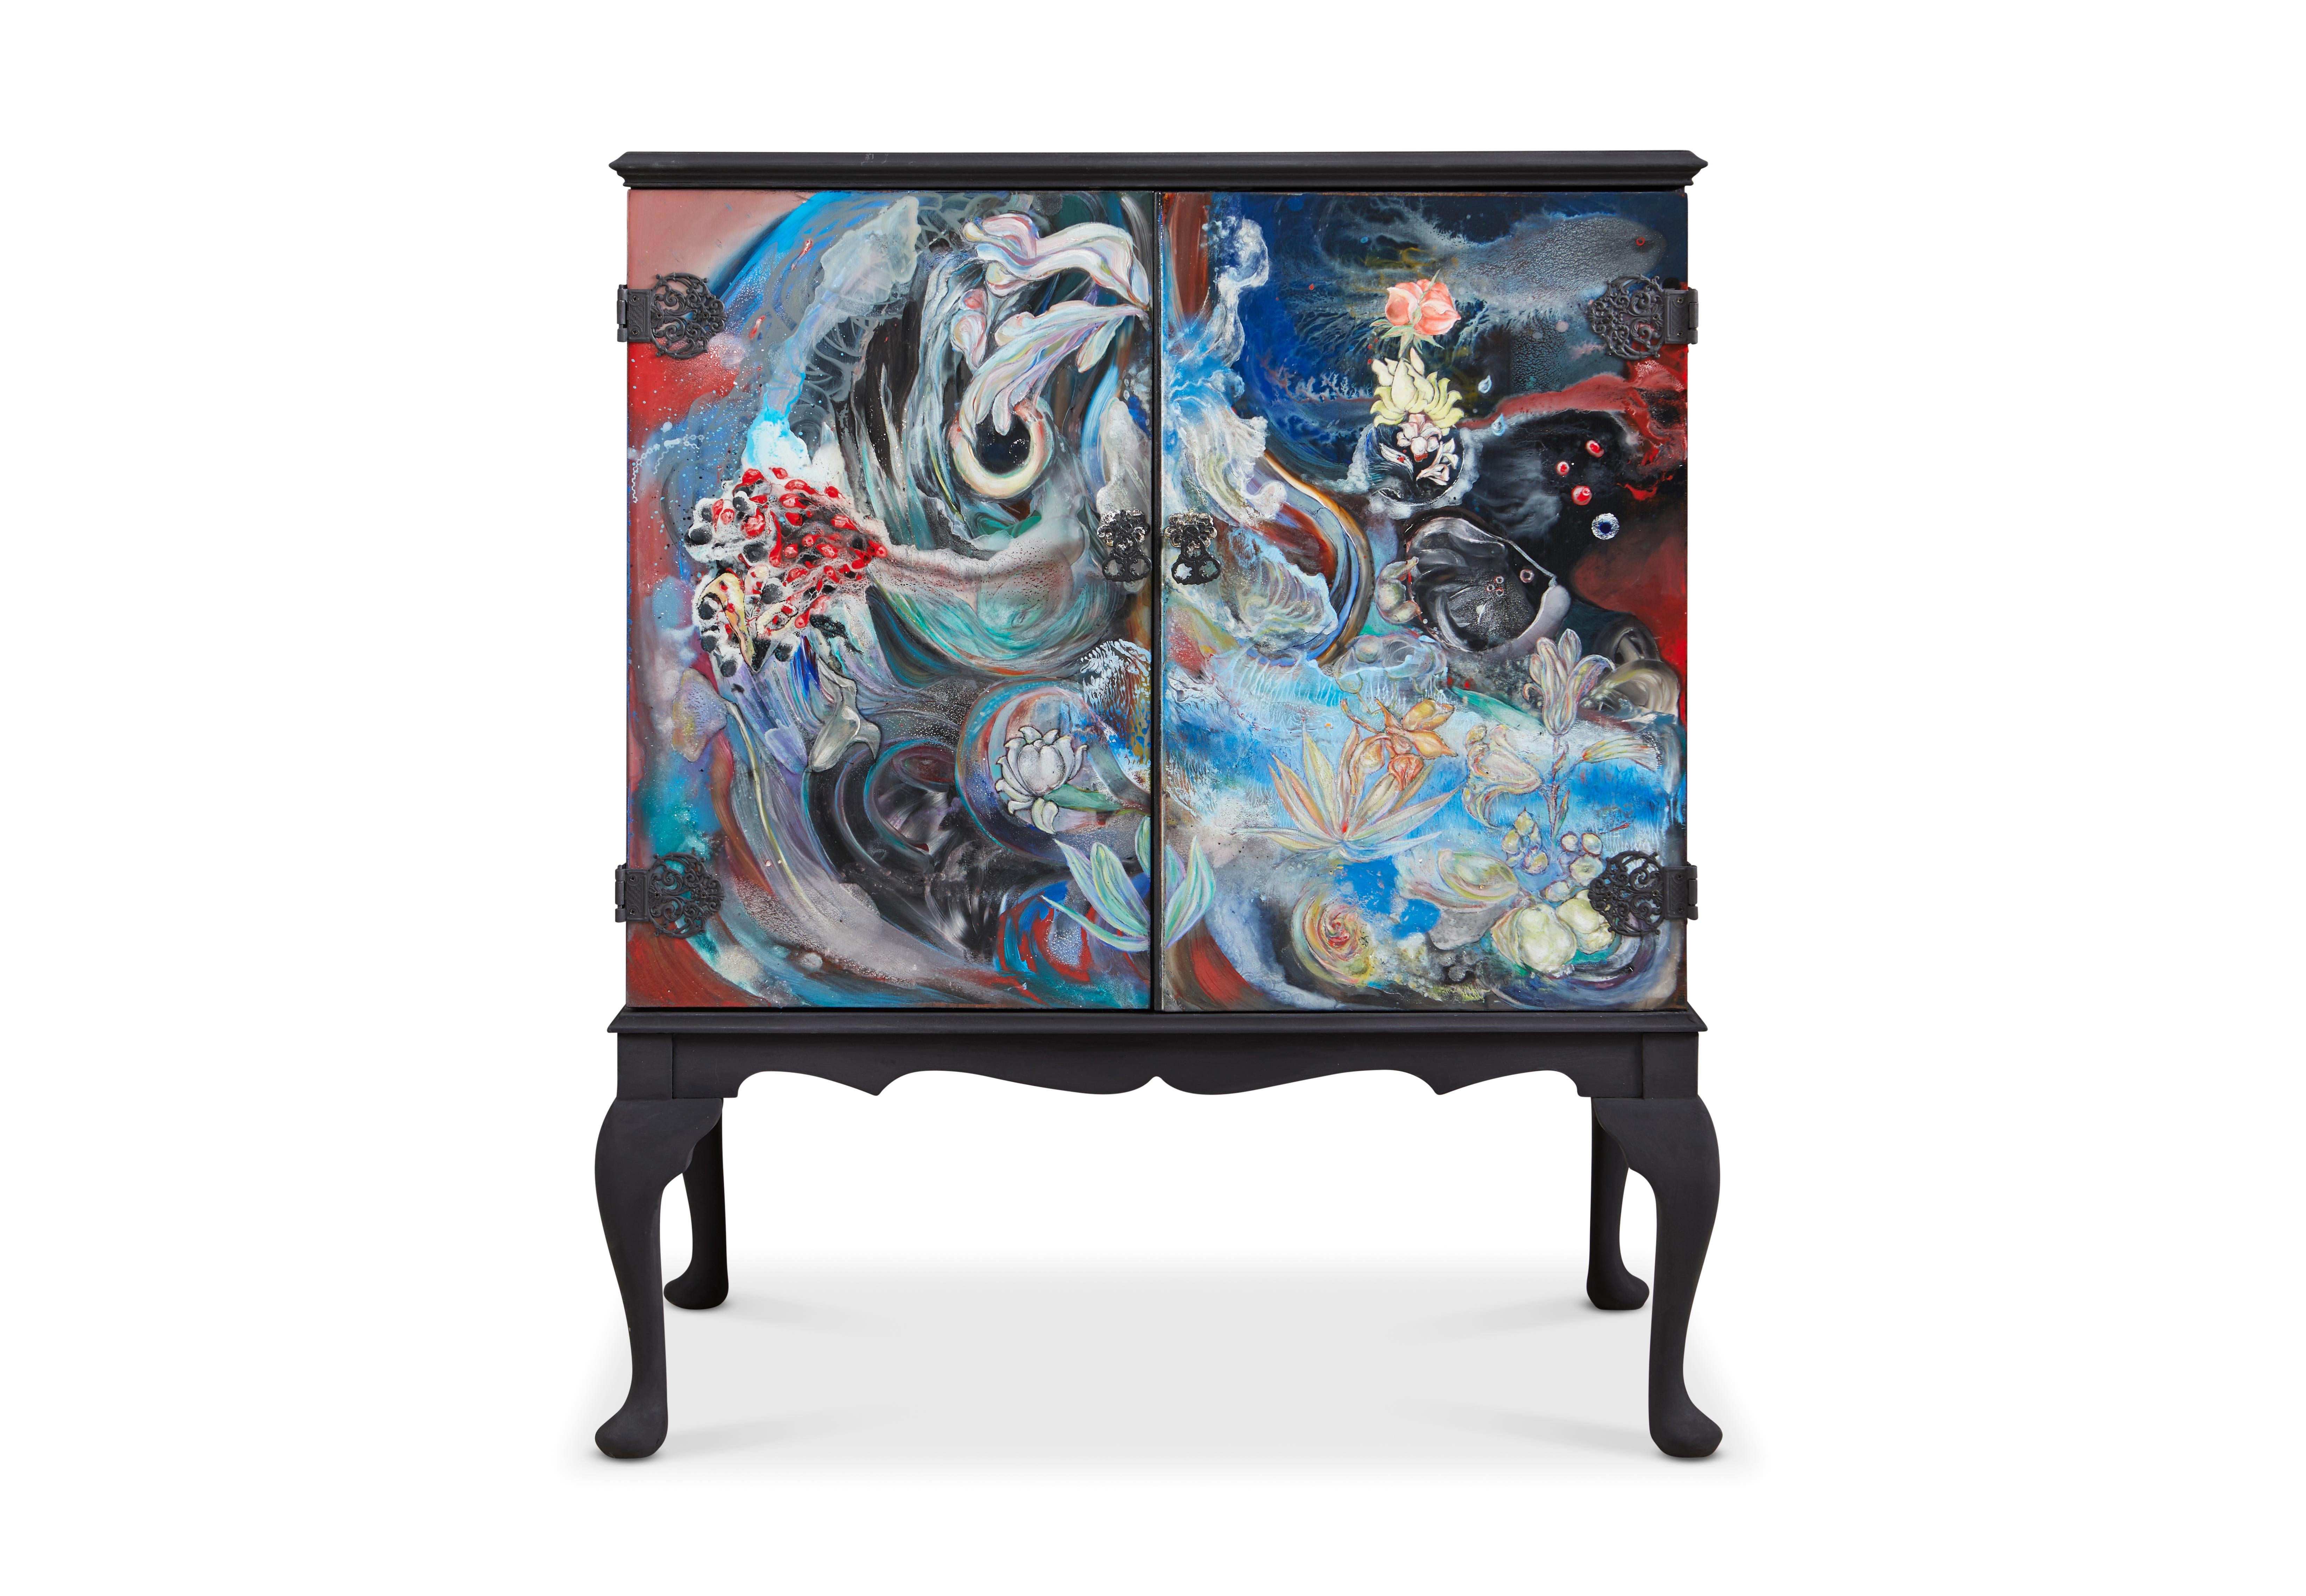 Aquatic Flow Cabinet Art on Furniture Acrylic paint cabinet hand painted bespoke